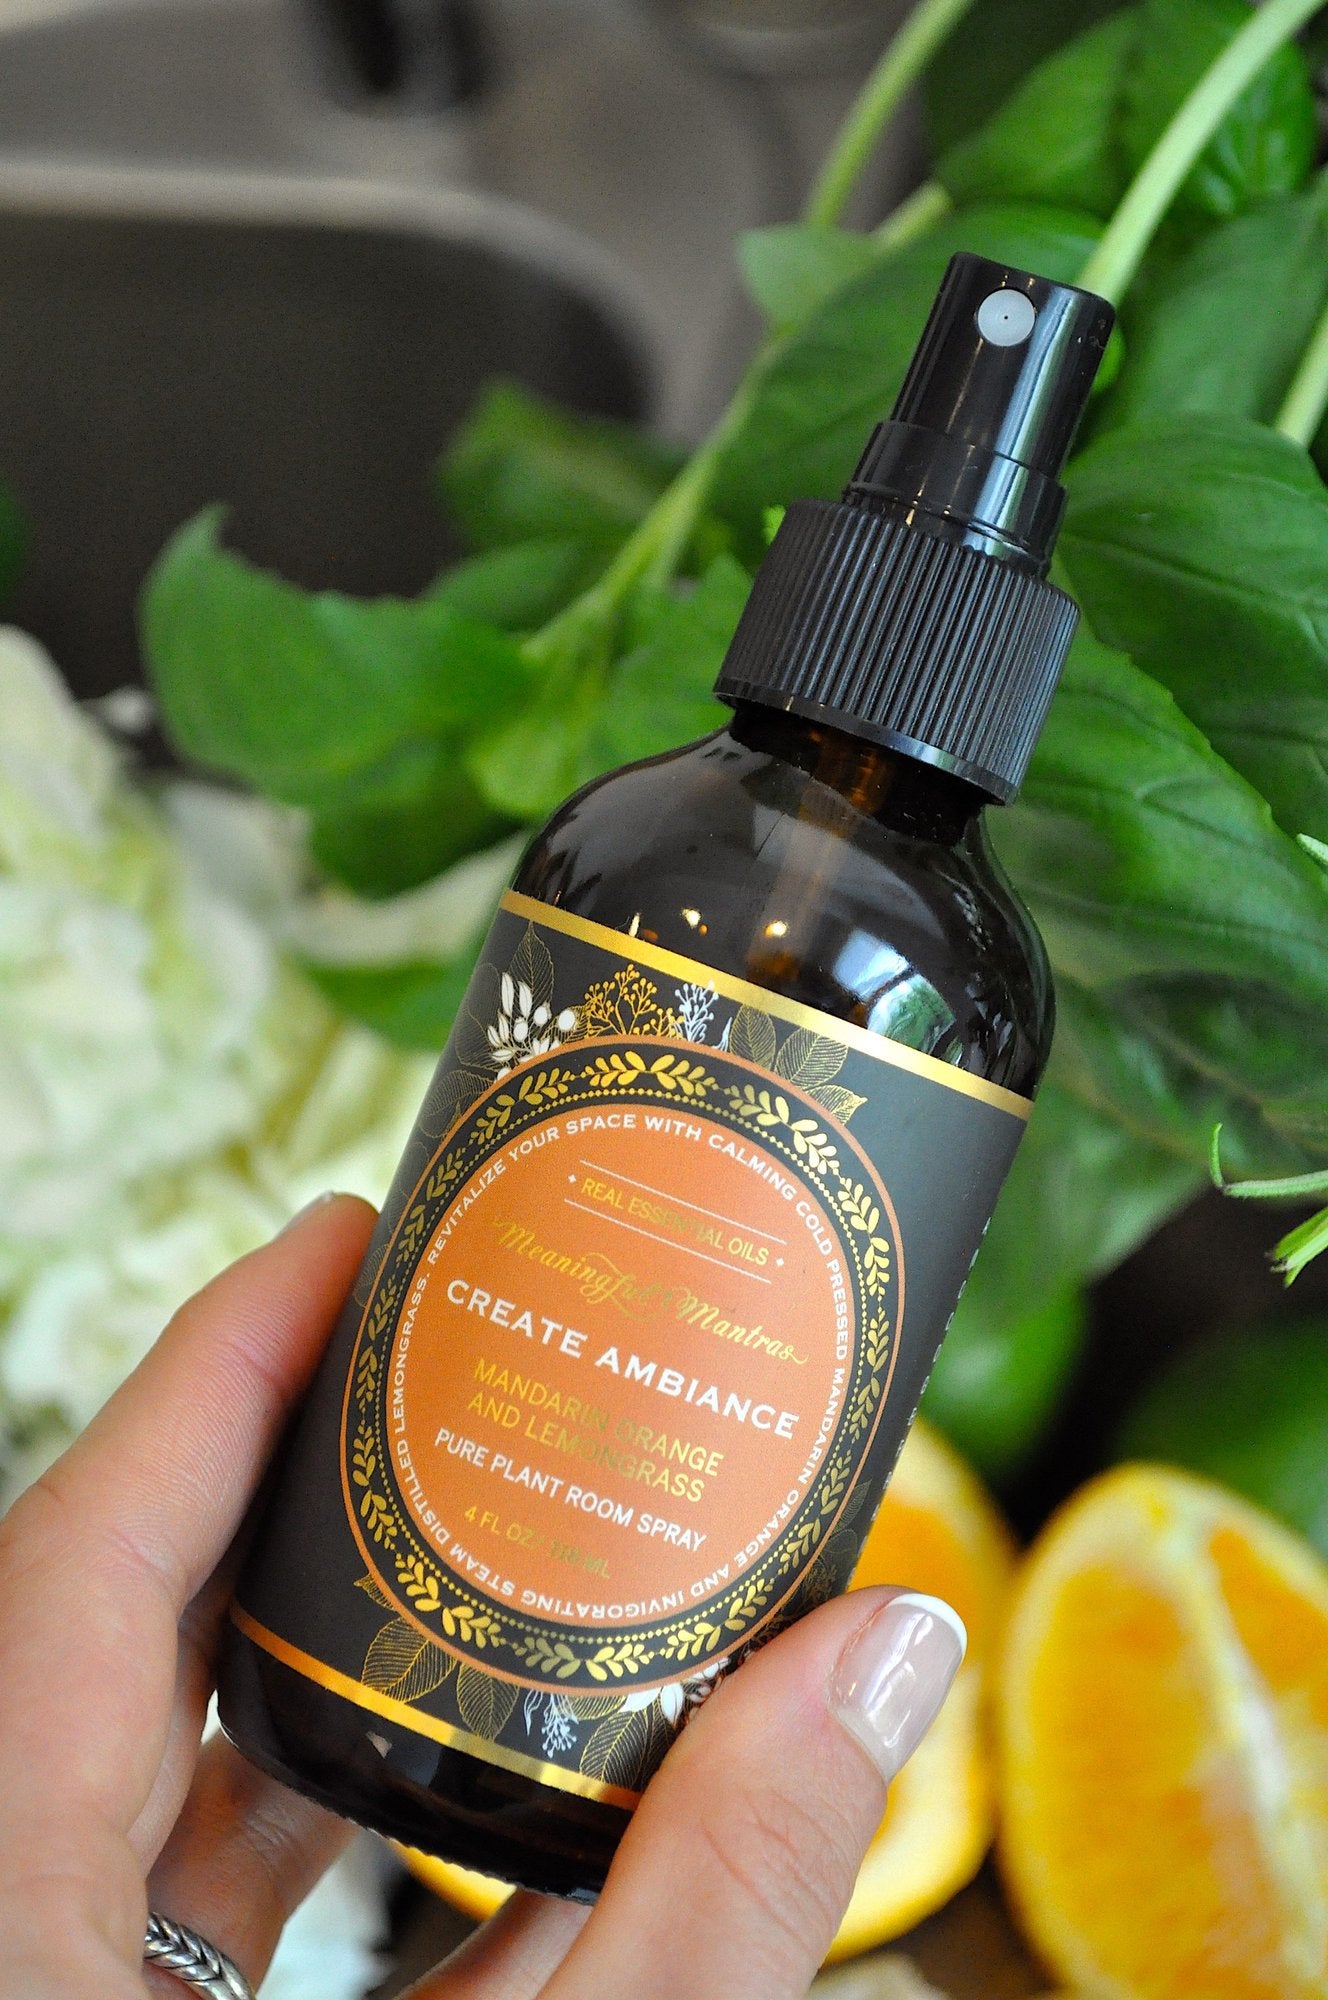 Create Ambiance Pure Plant Room Spray